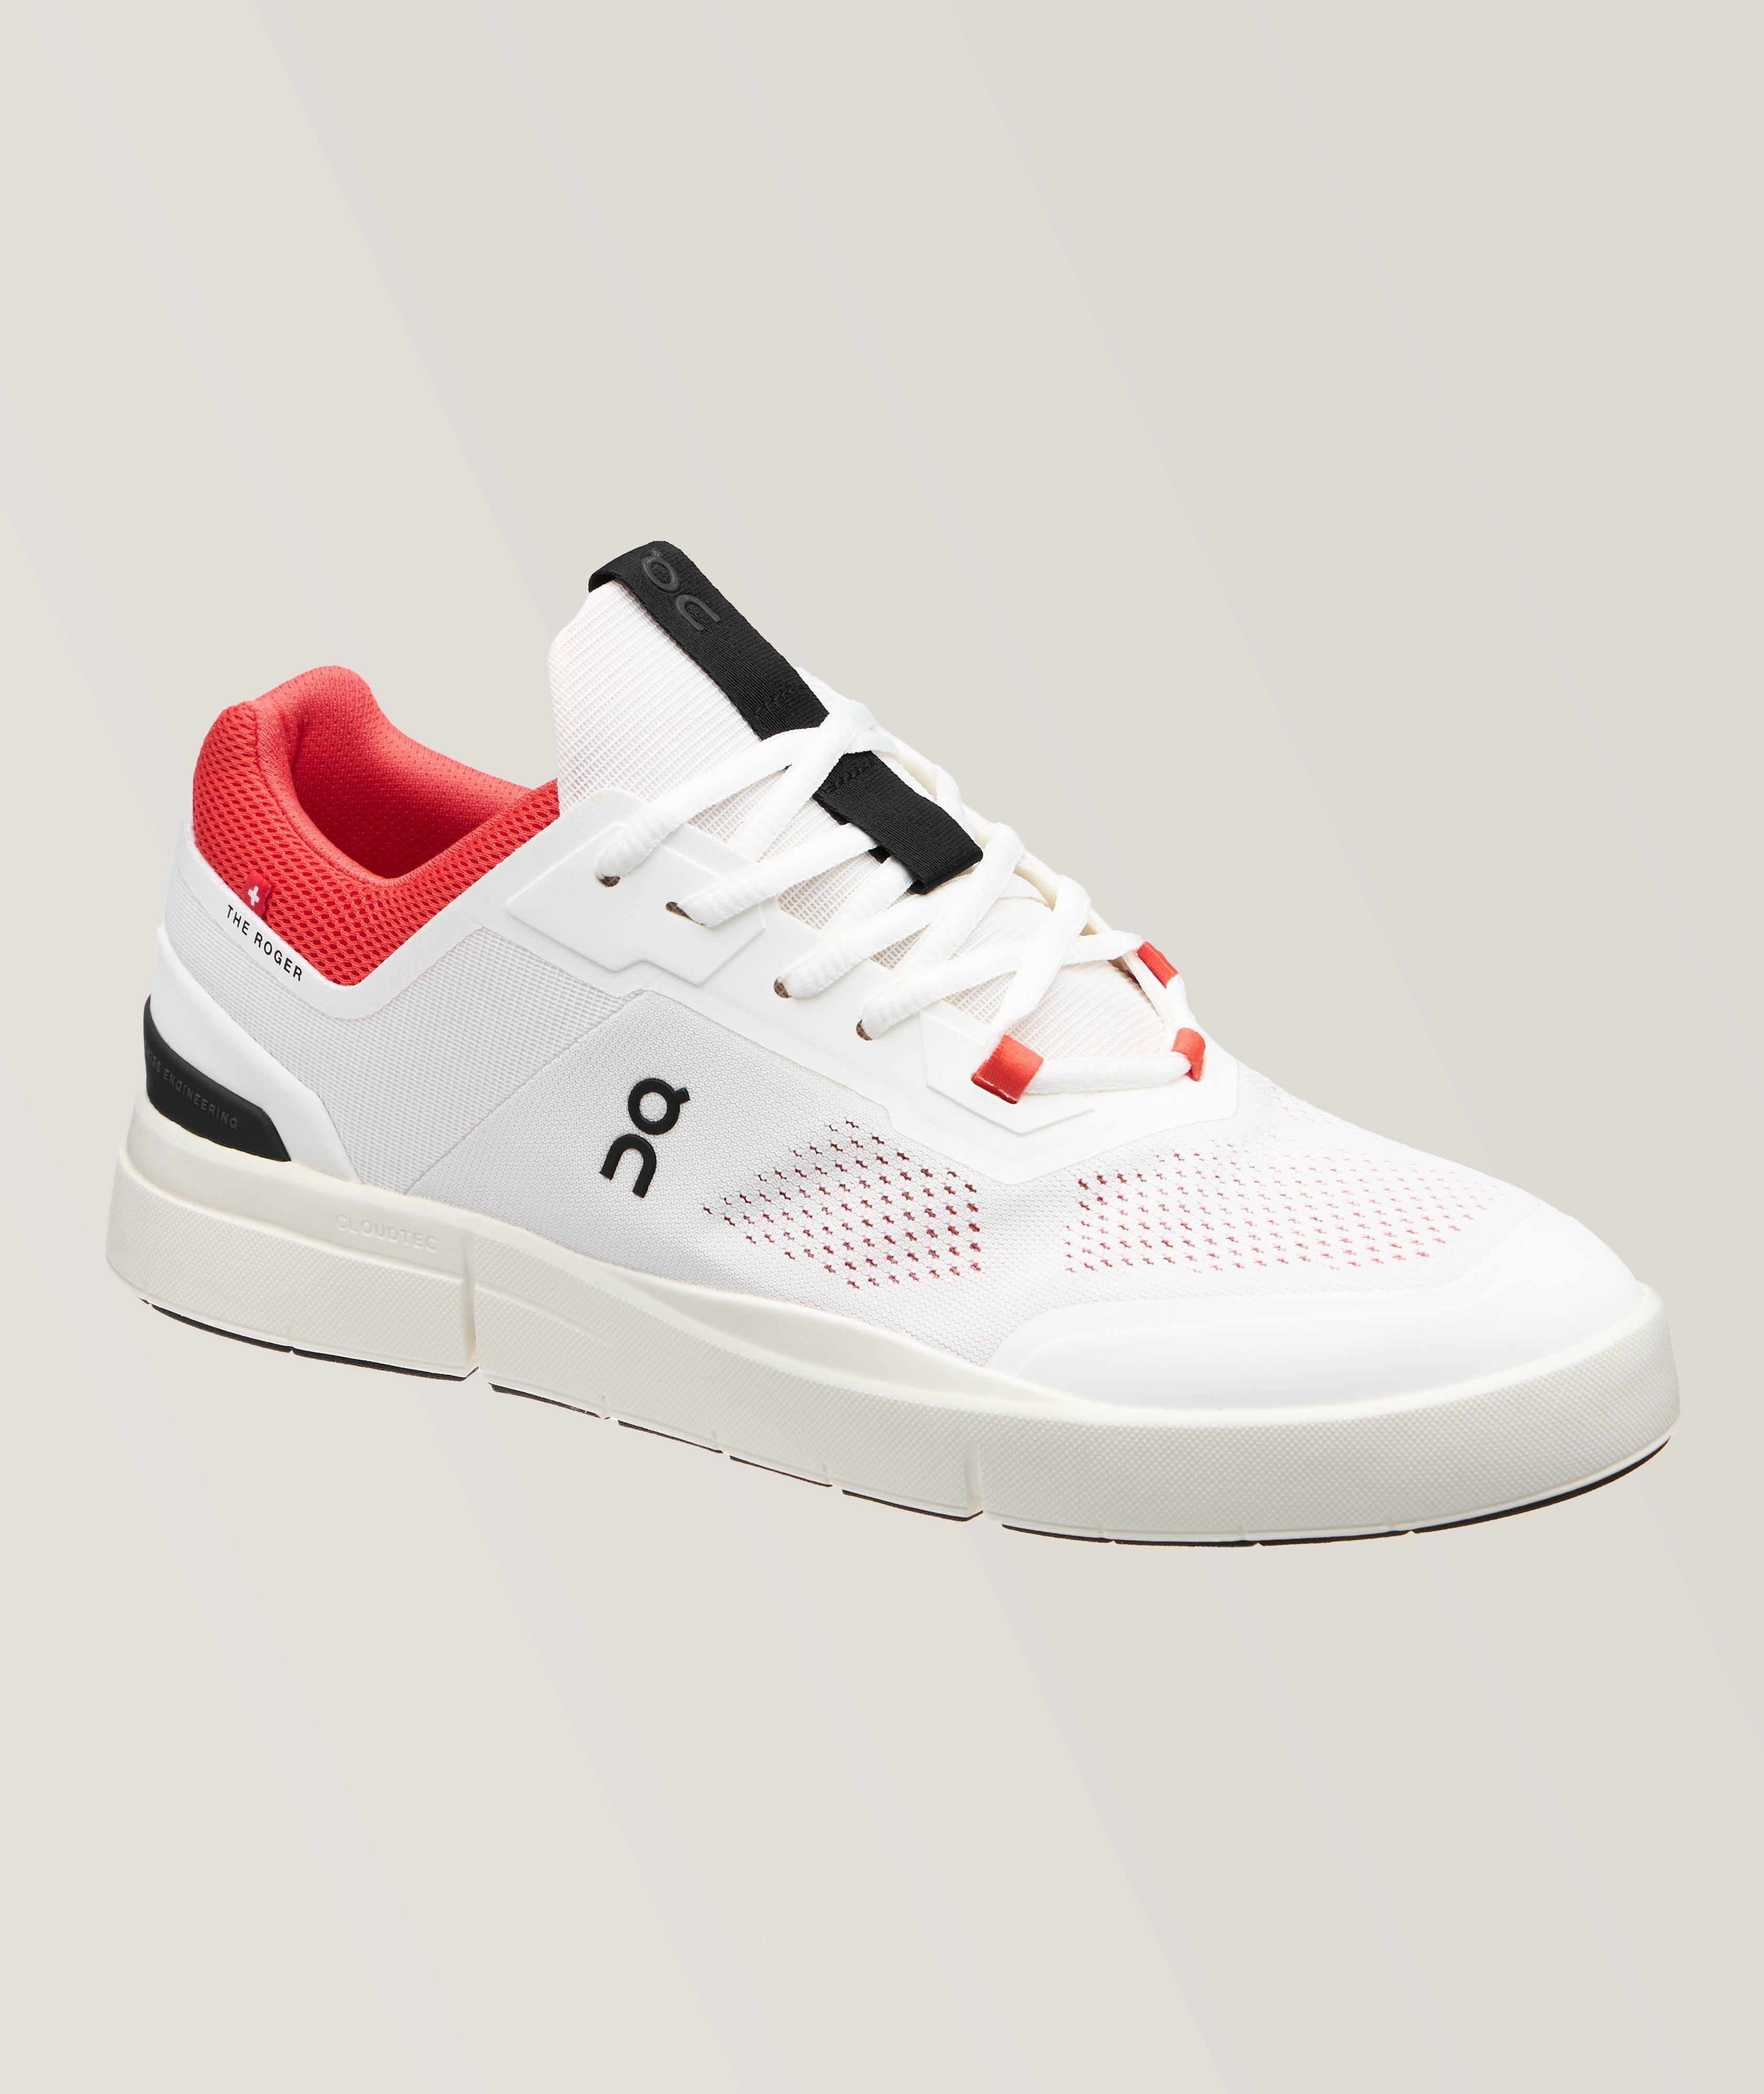 The ROGER Spin Sneakers image 0